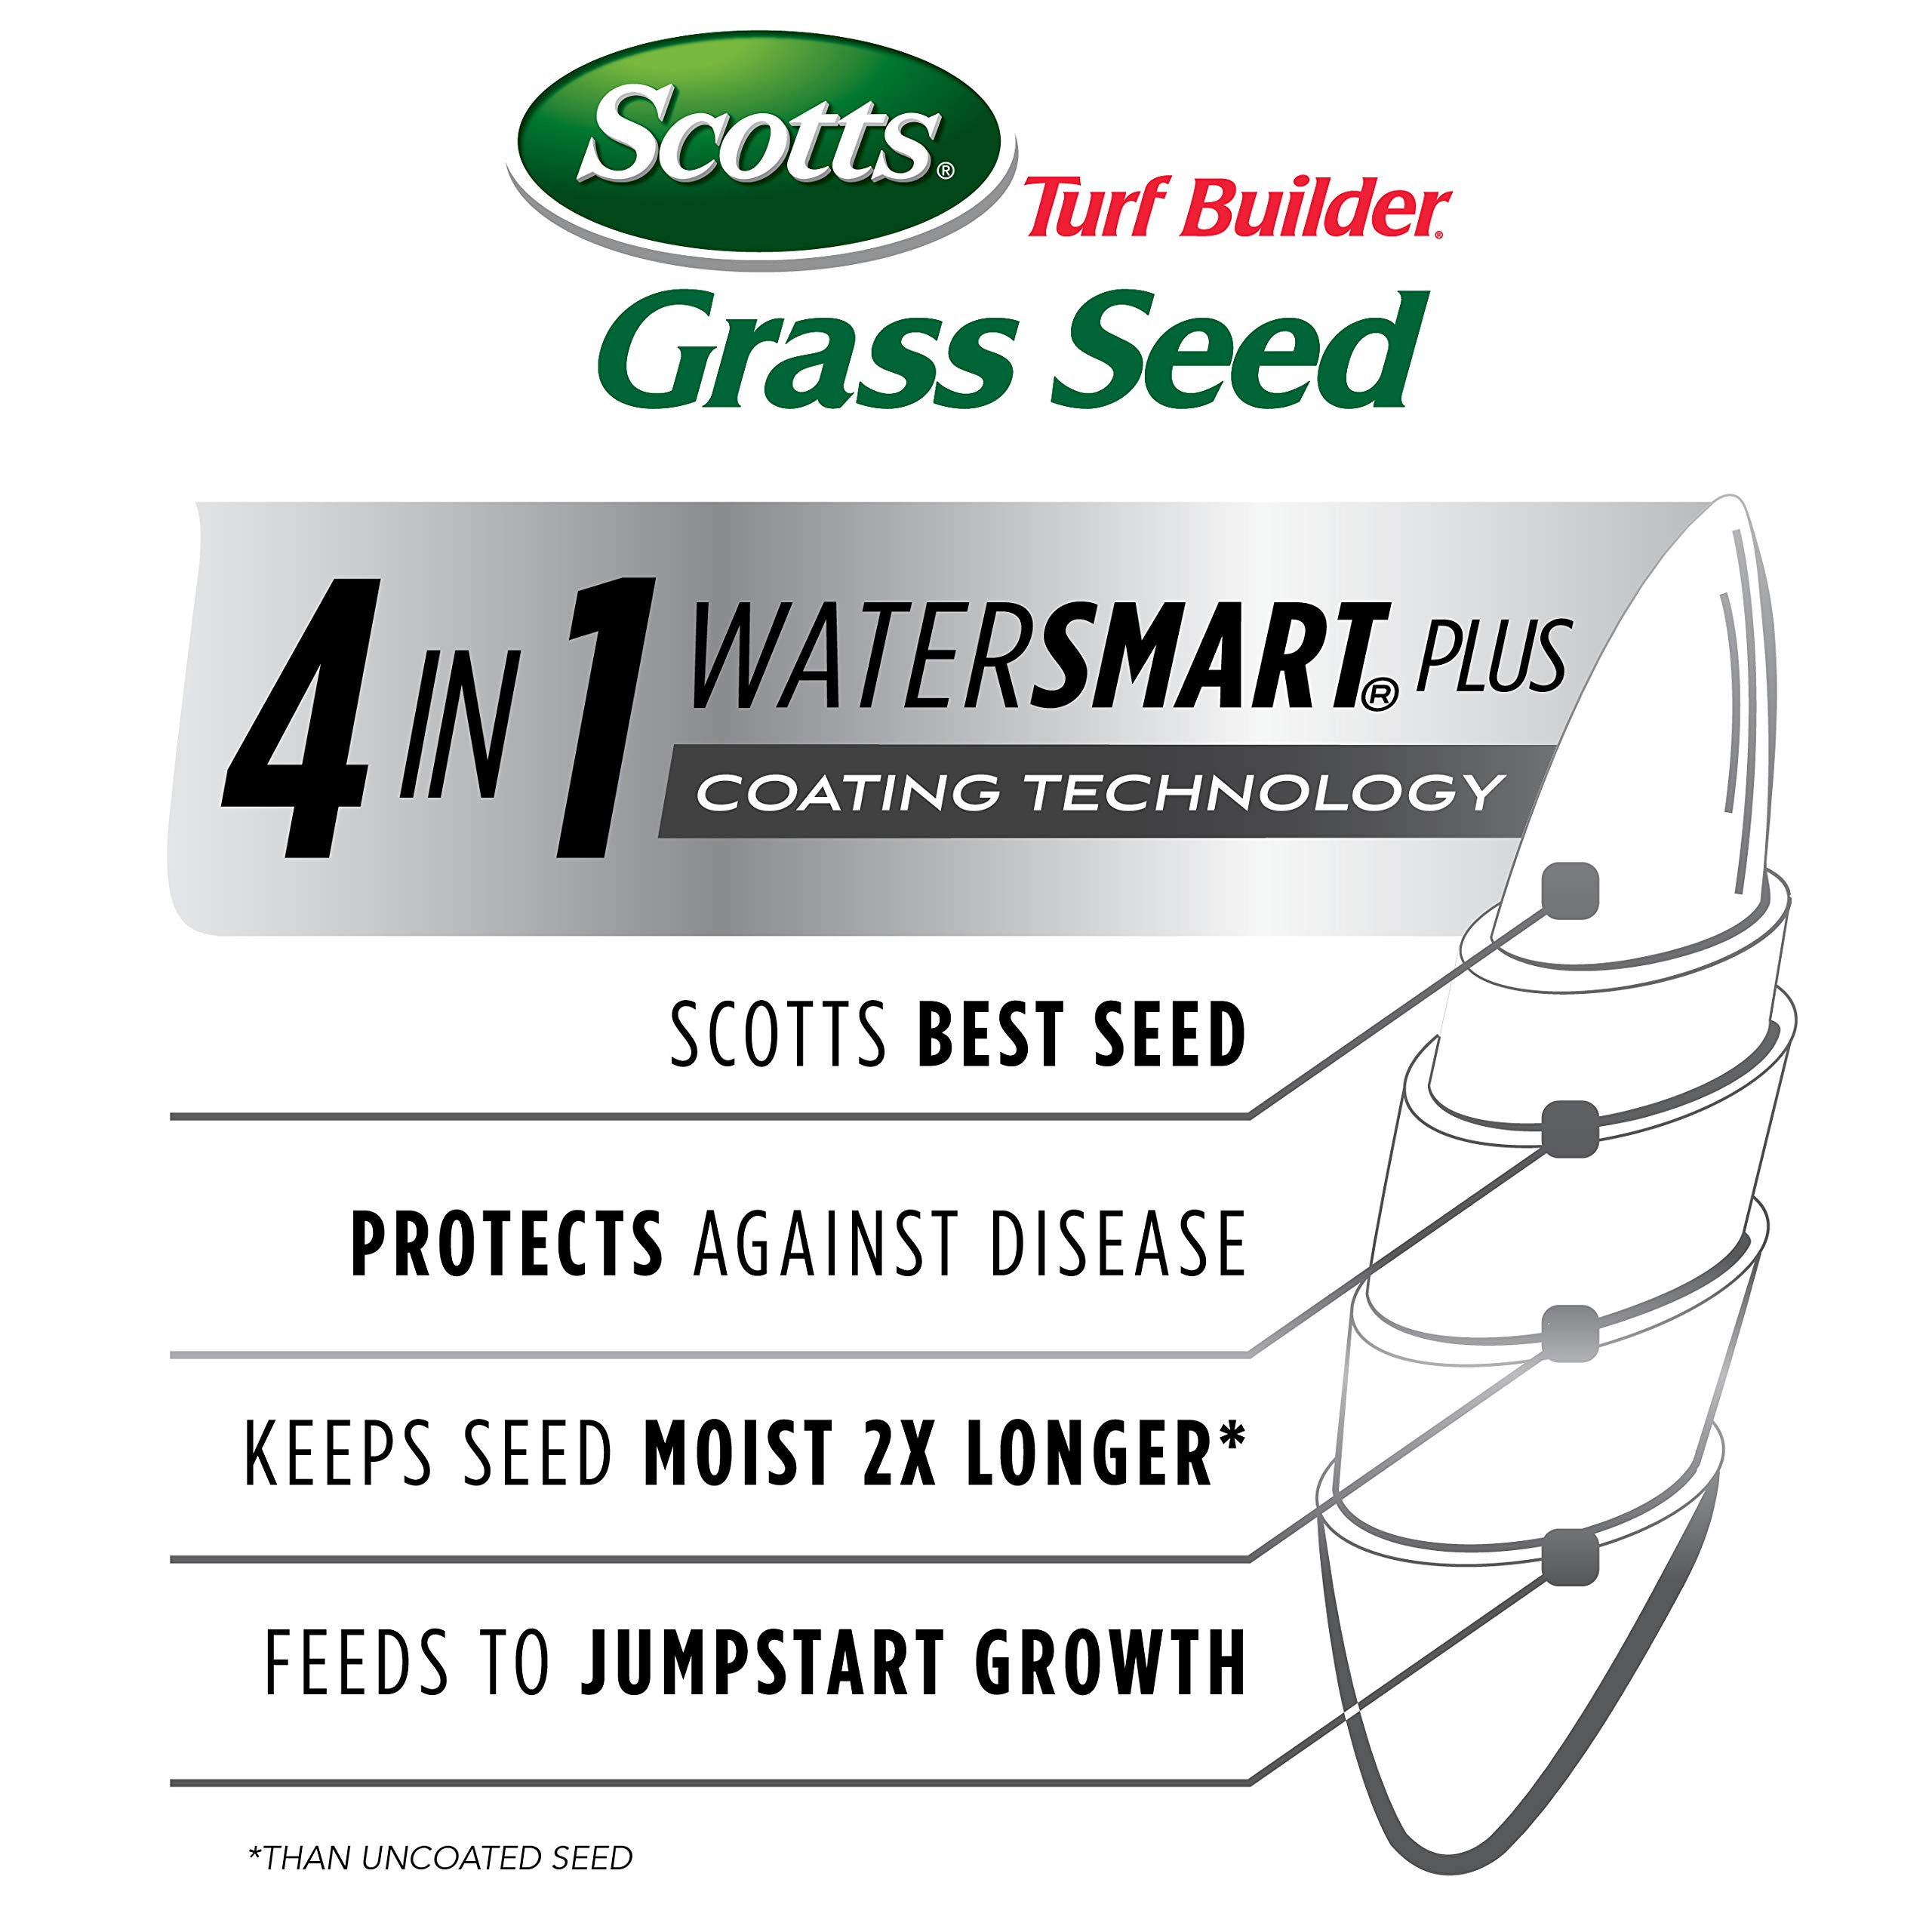 Scotts Turf Builder Grass Seed High Traffic Mix Establishes Strong Roots and Self-Repairs to Withstand Wear and Tear, 3 lbs.